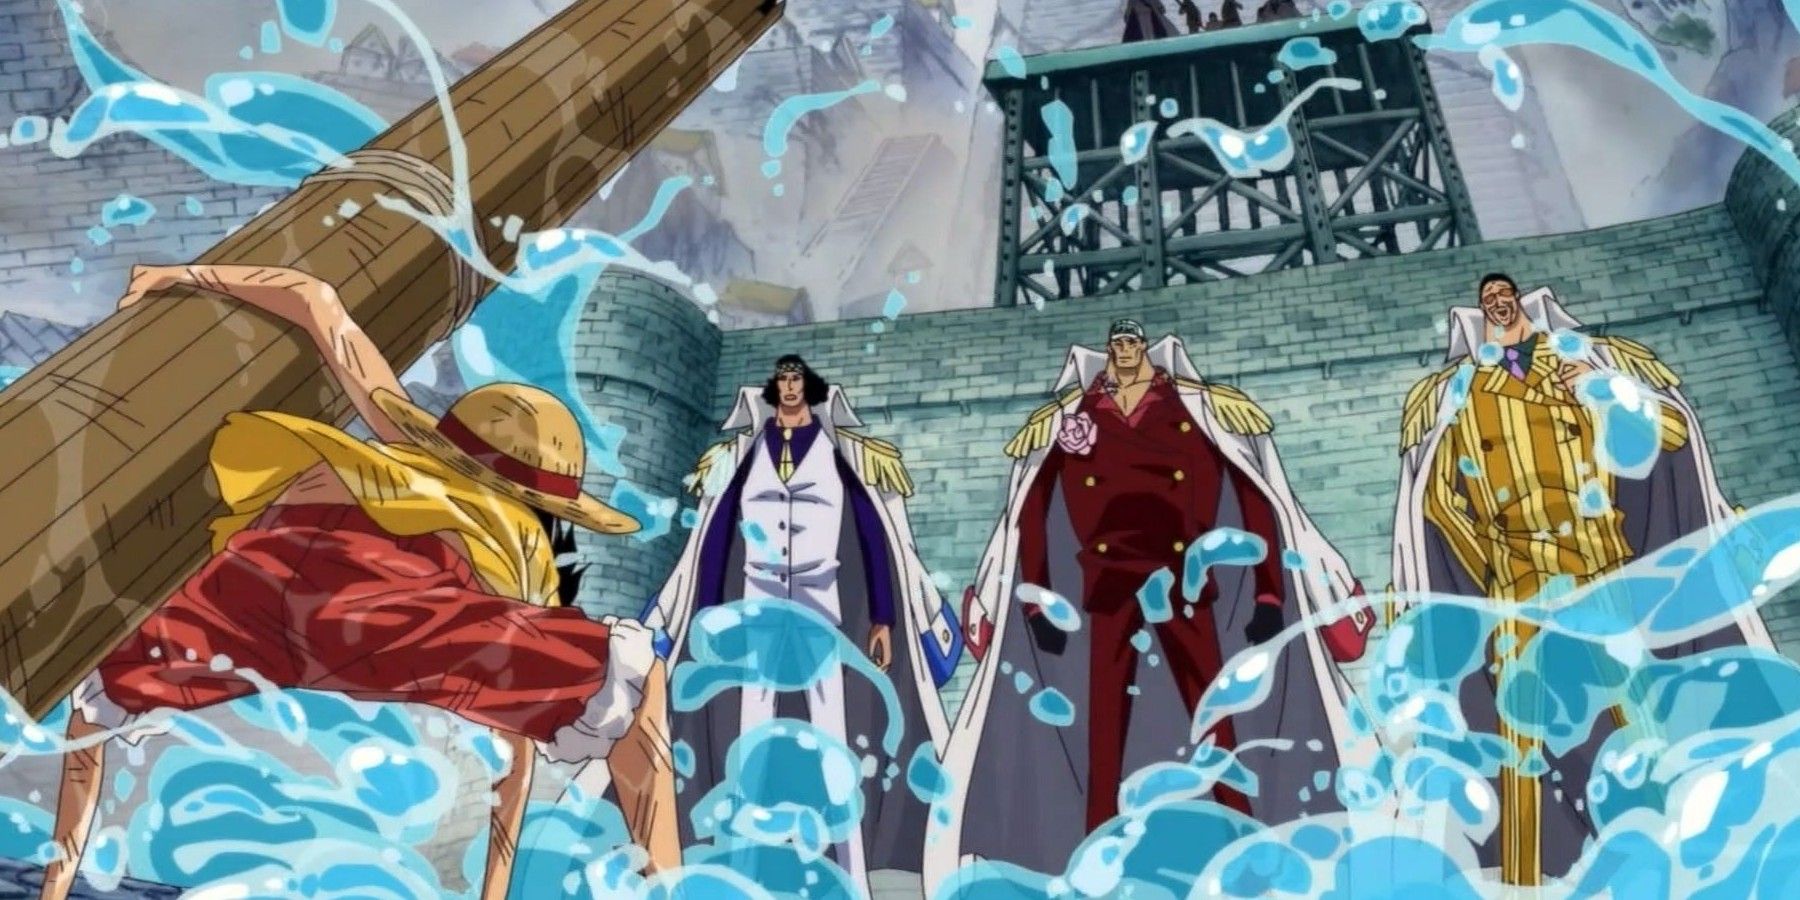 One Piece All The Marine Admirals In The Story Ranked By Strength